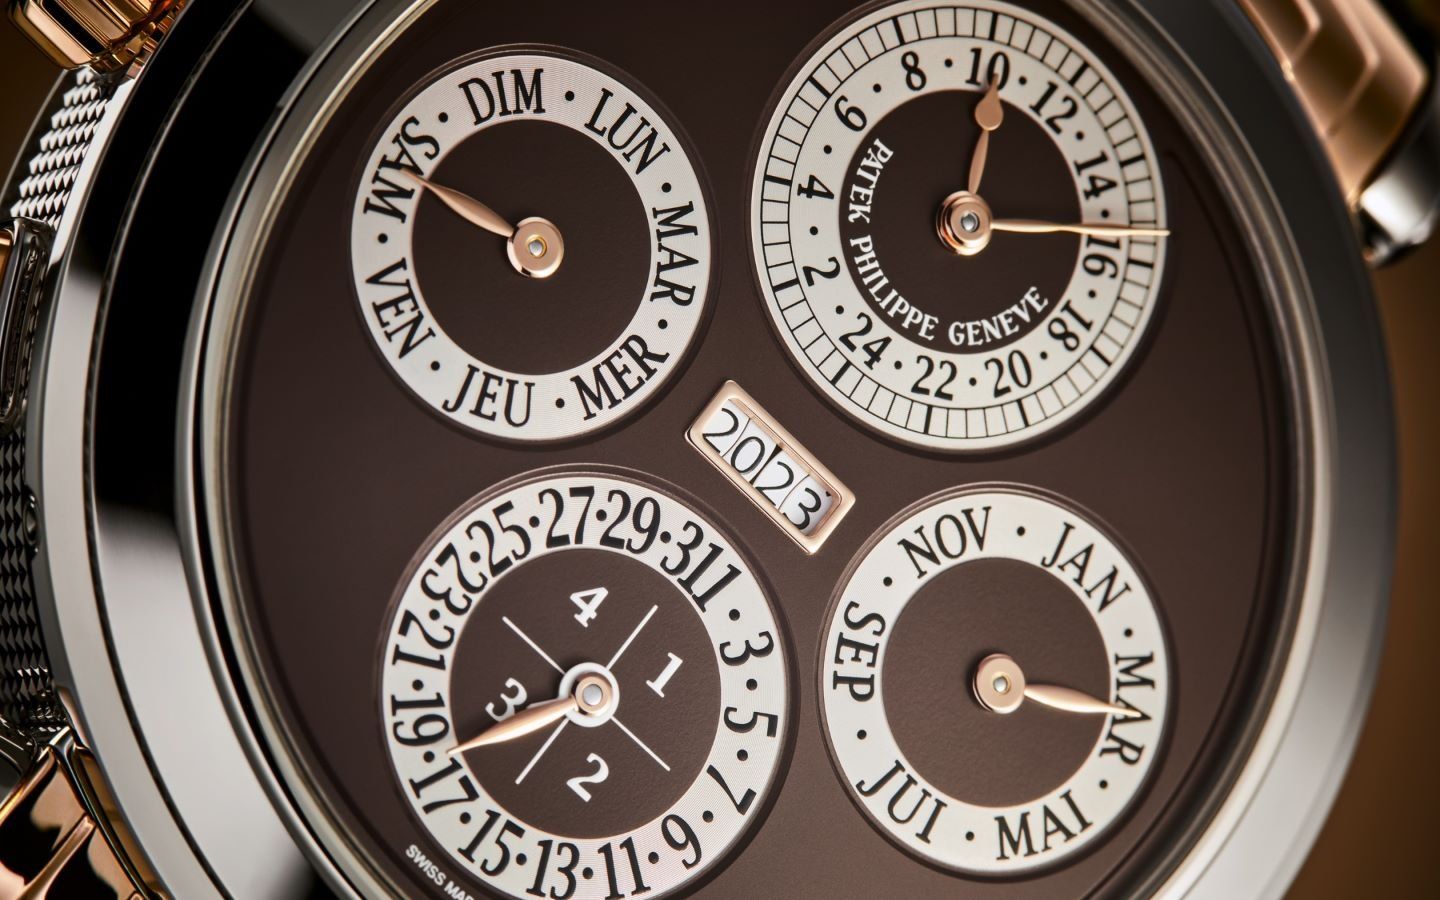 Patek Philippe Grandmaster Chime In White Gold & Rose Gold Iterations